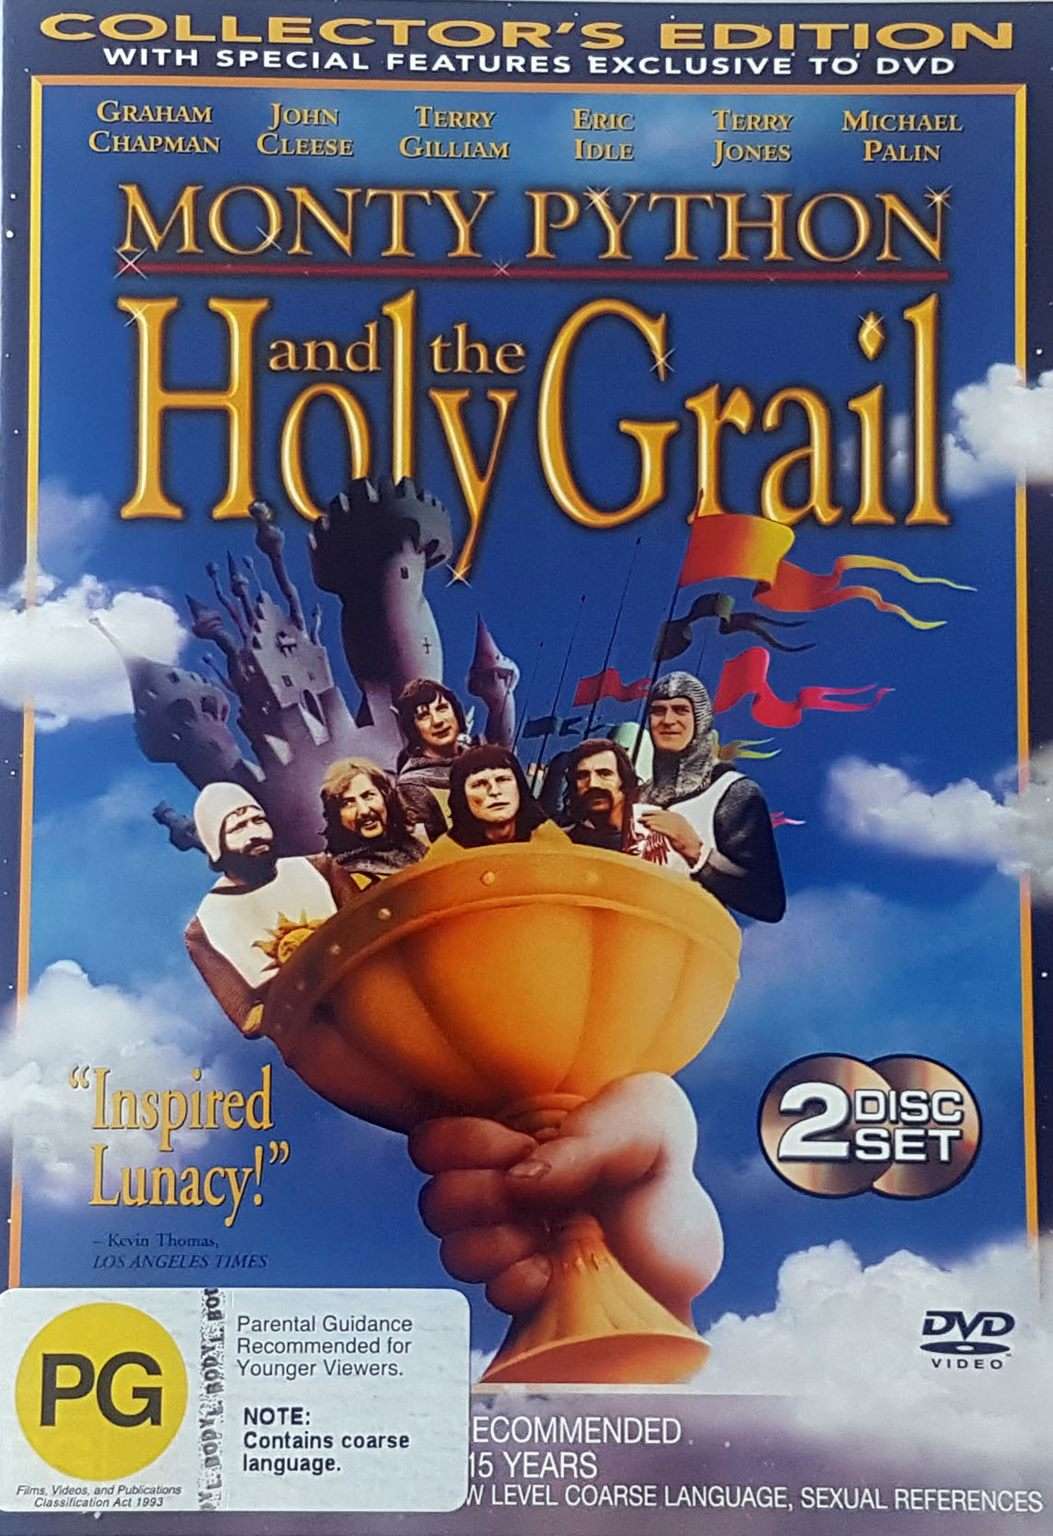 Monty Python and the Holy Grail 2 Disc Collector's Edition